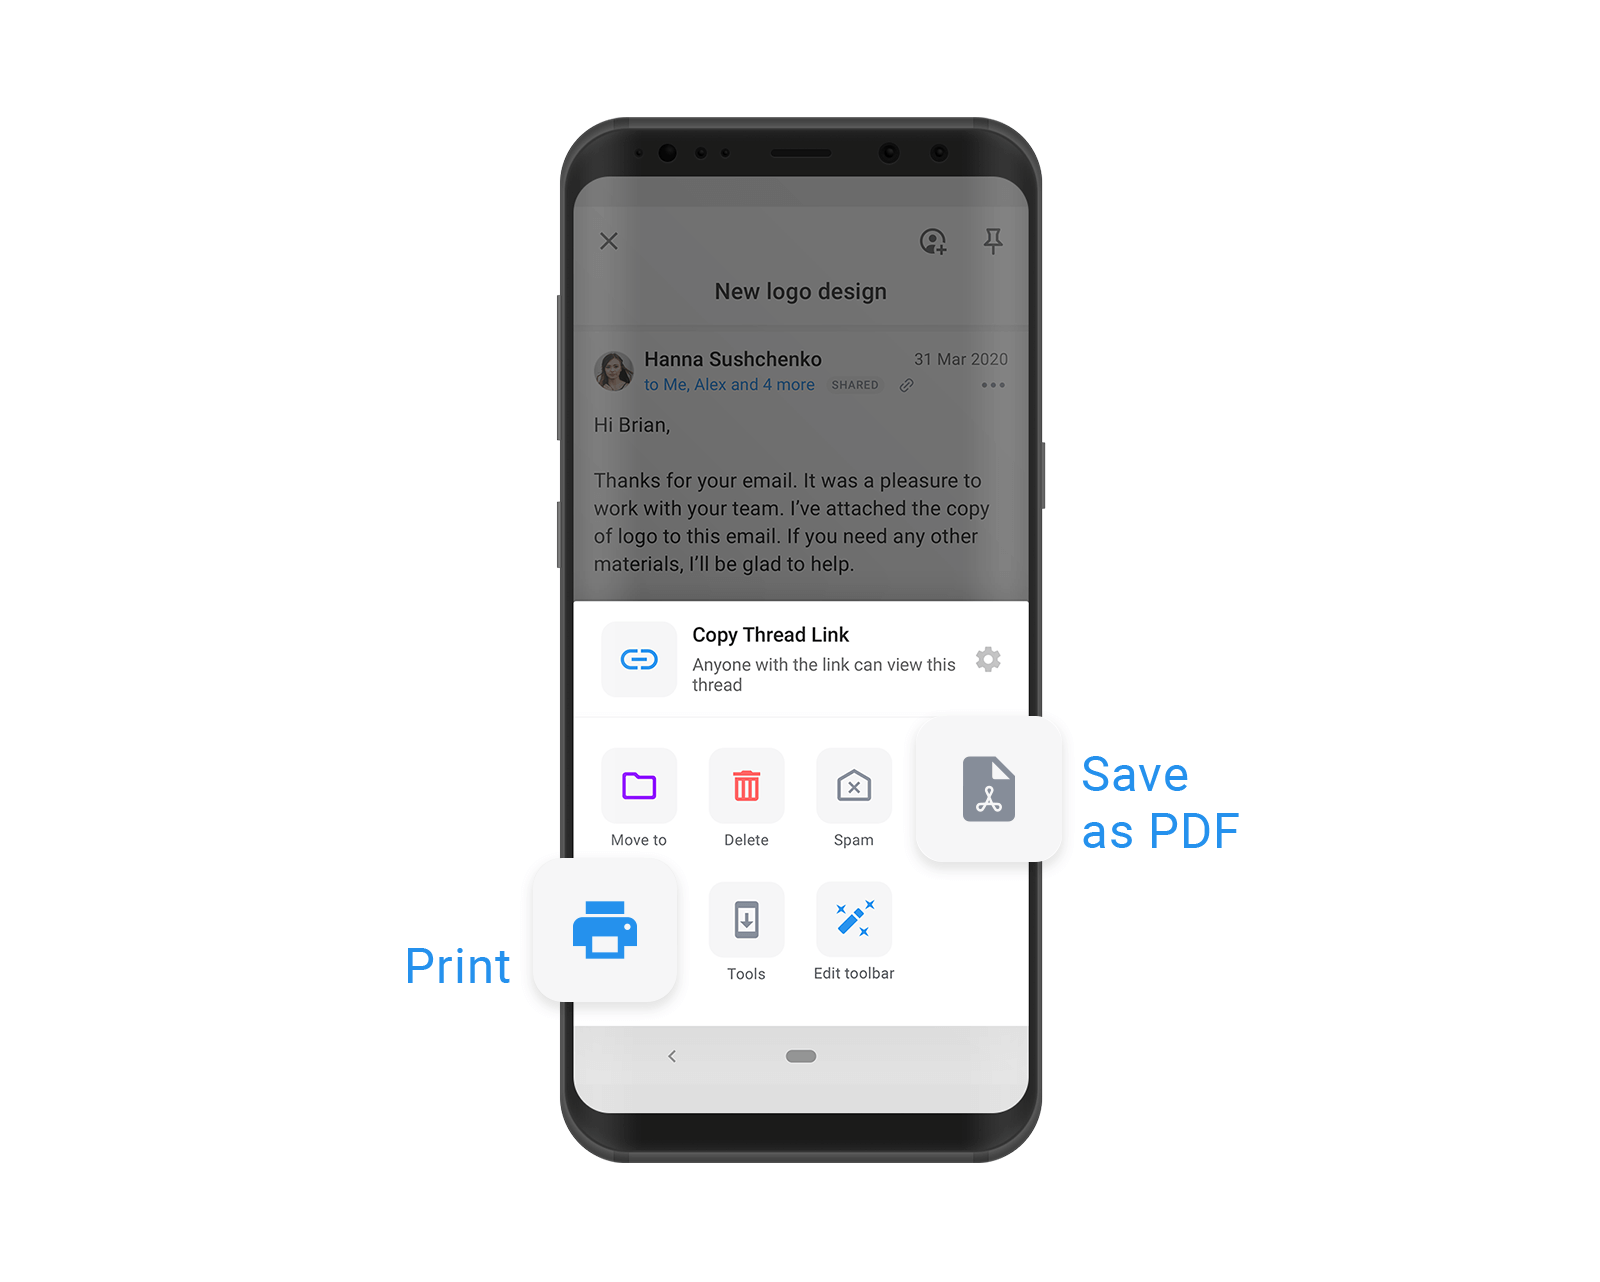 Prelude indendørs gjorde det Spark Email on Twitter: "You can now print or save emails as PDF in my  Android version 2.5 🖨 Just tap ...More on an email and select Print or  Save as PDF.